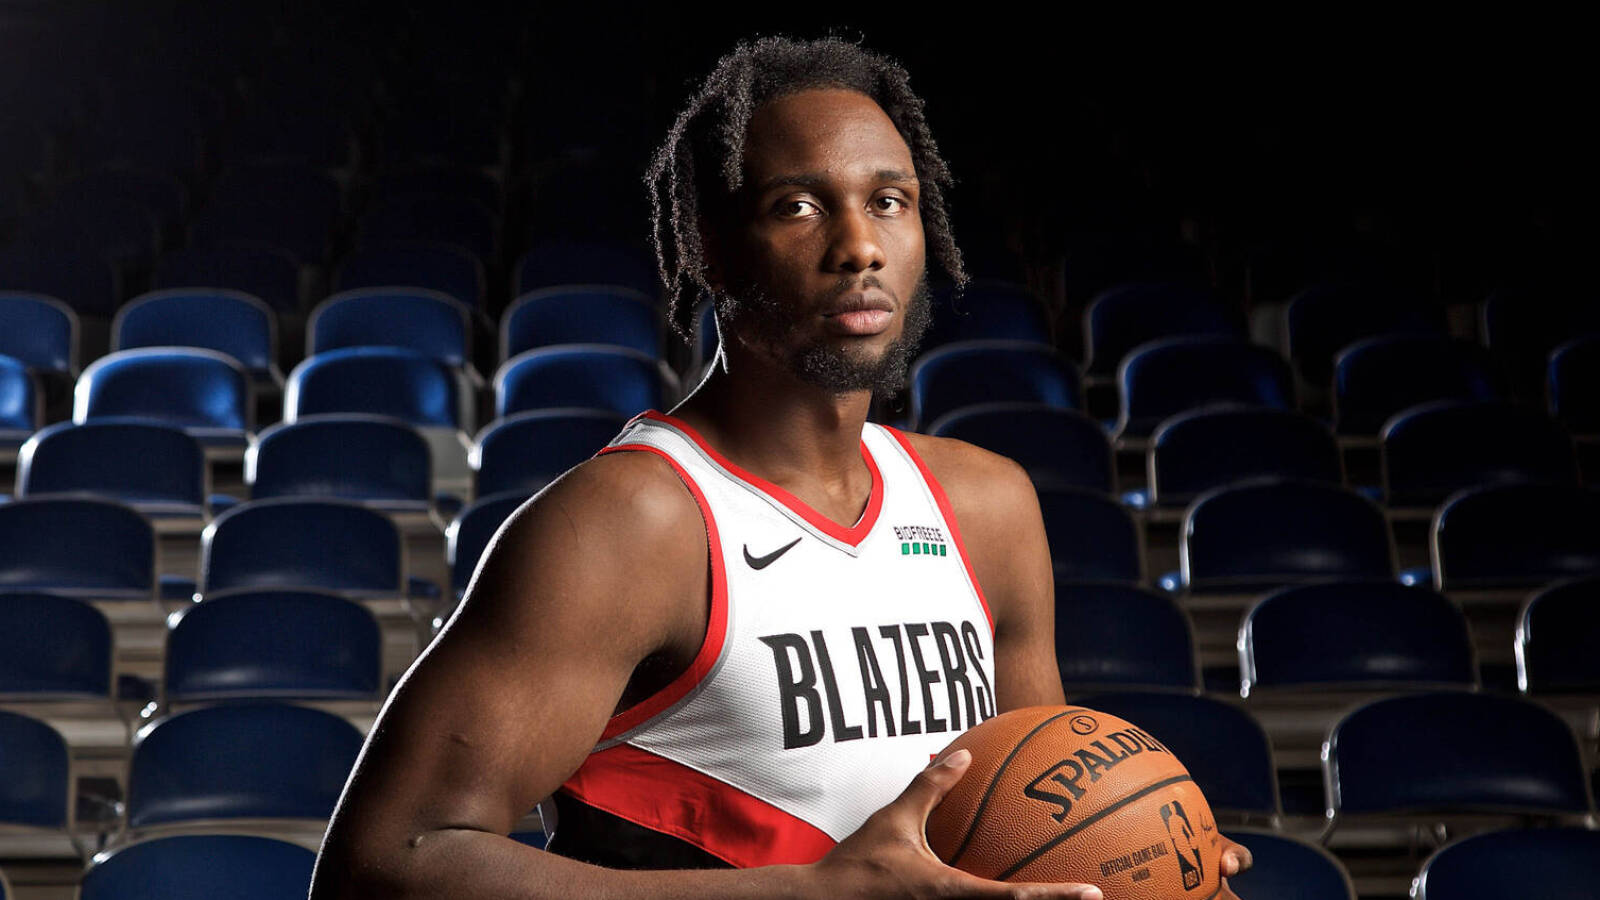 Former Purdue star, Big Ten Player of the Year Caleb Swanigan passes away at 25 years old